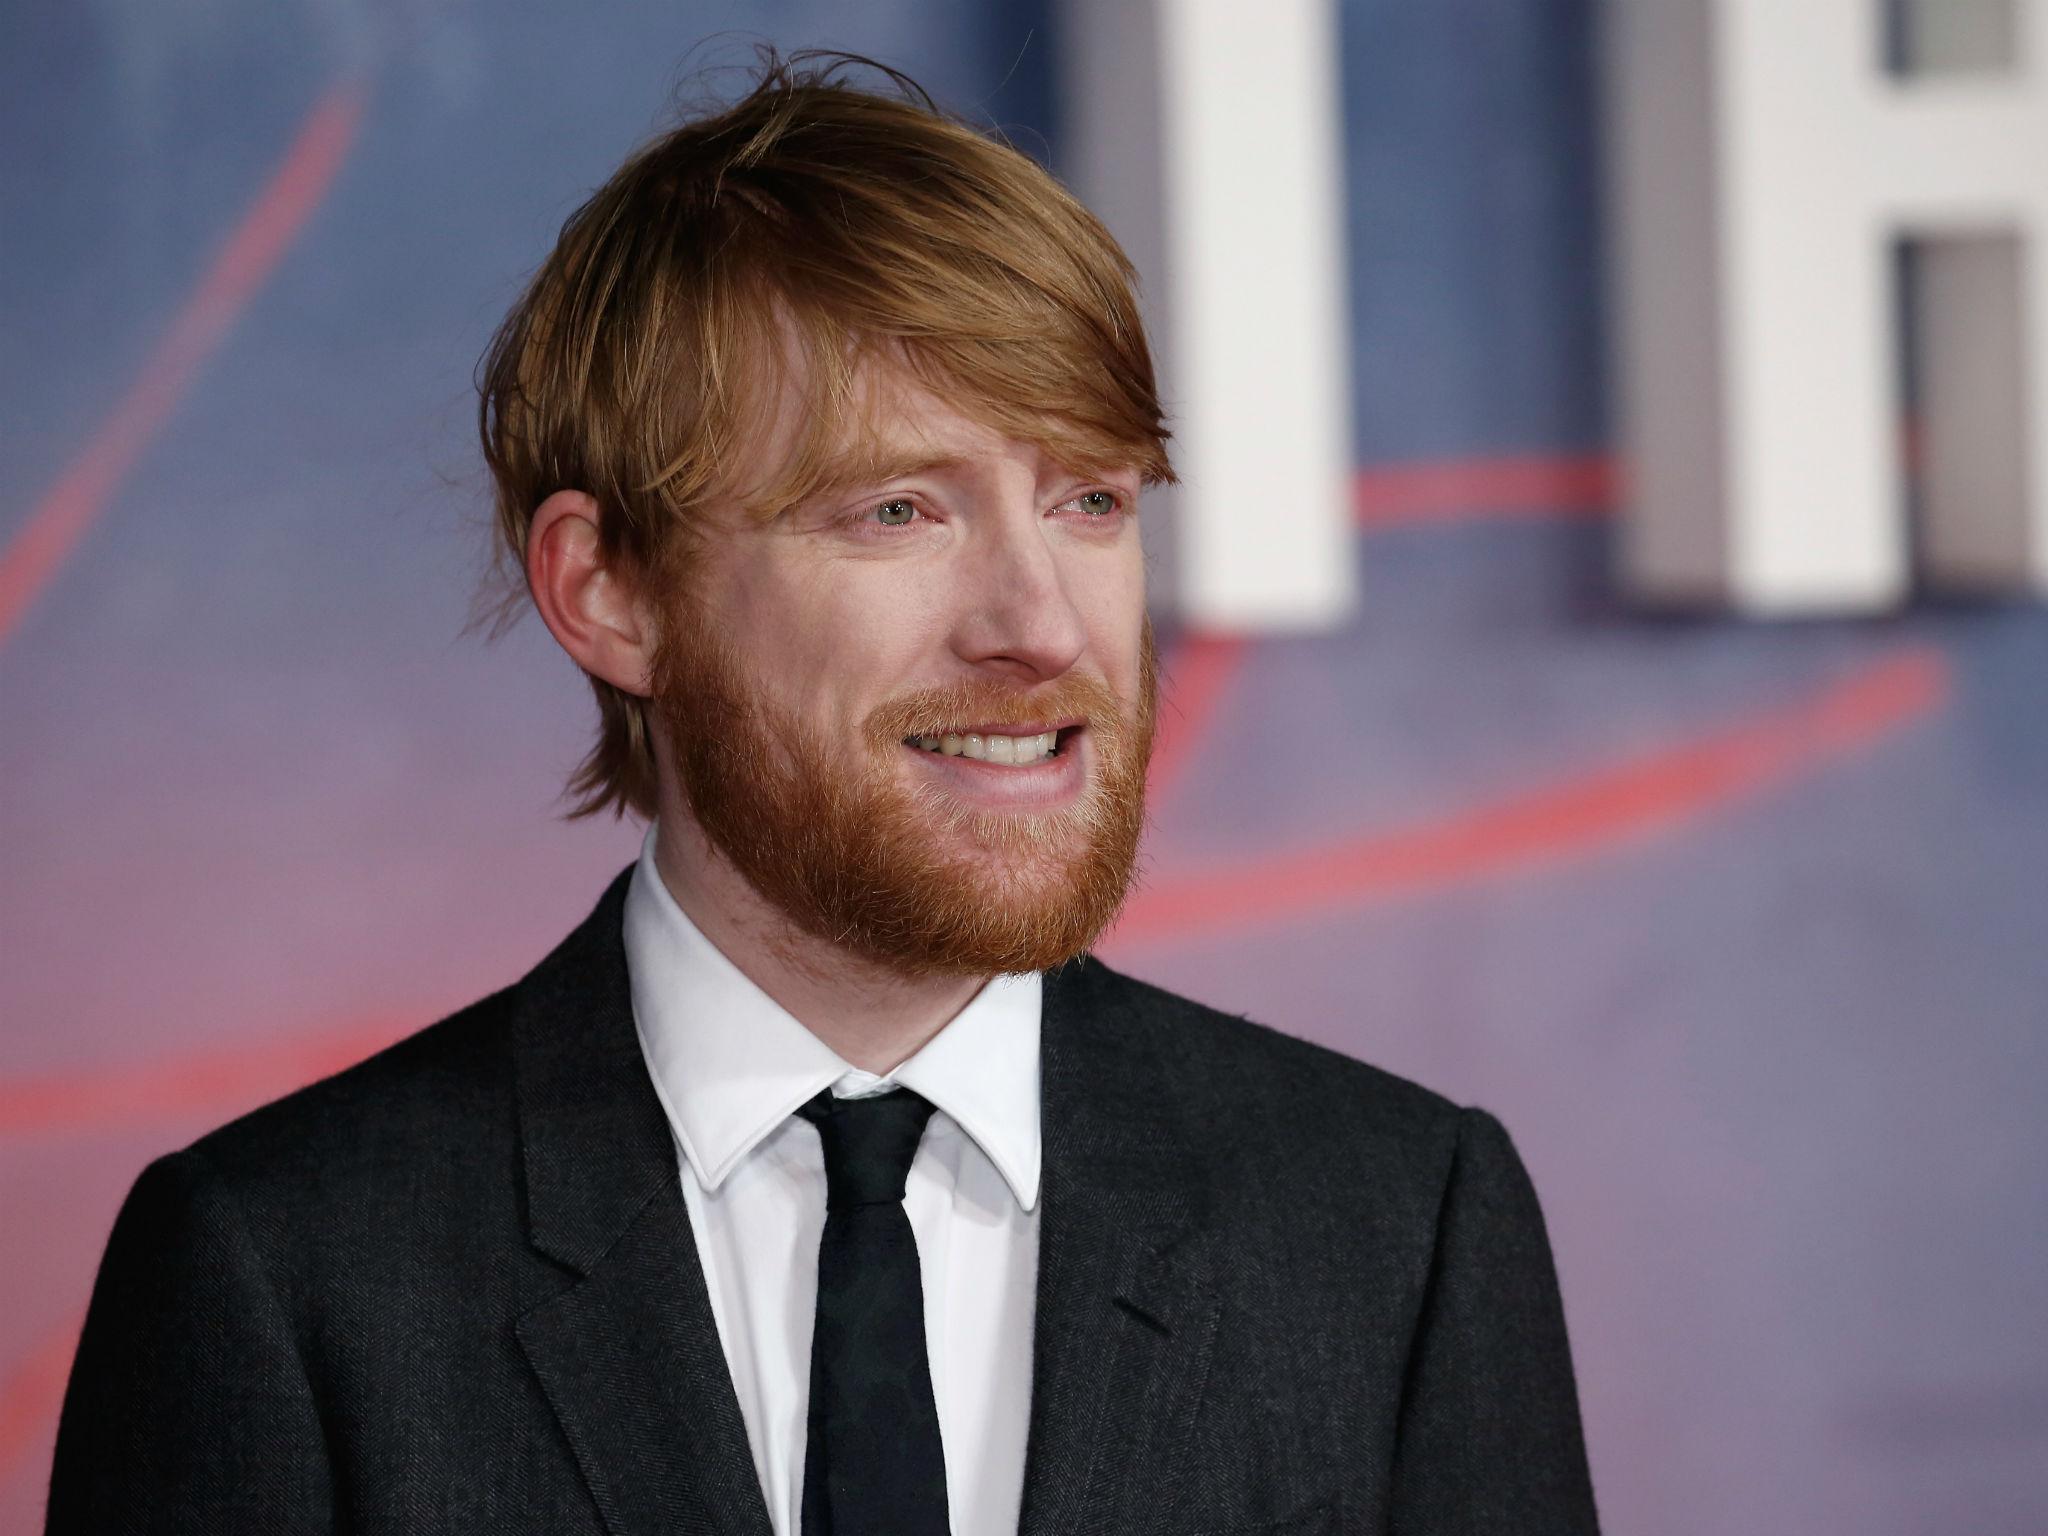 Domhnall Gleeson will play Winnie the Pooh author AA Milne in Goodbye Christopher Robin